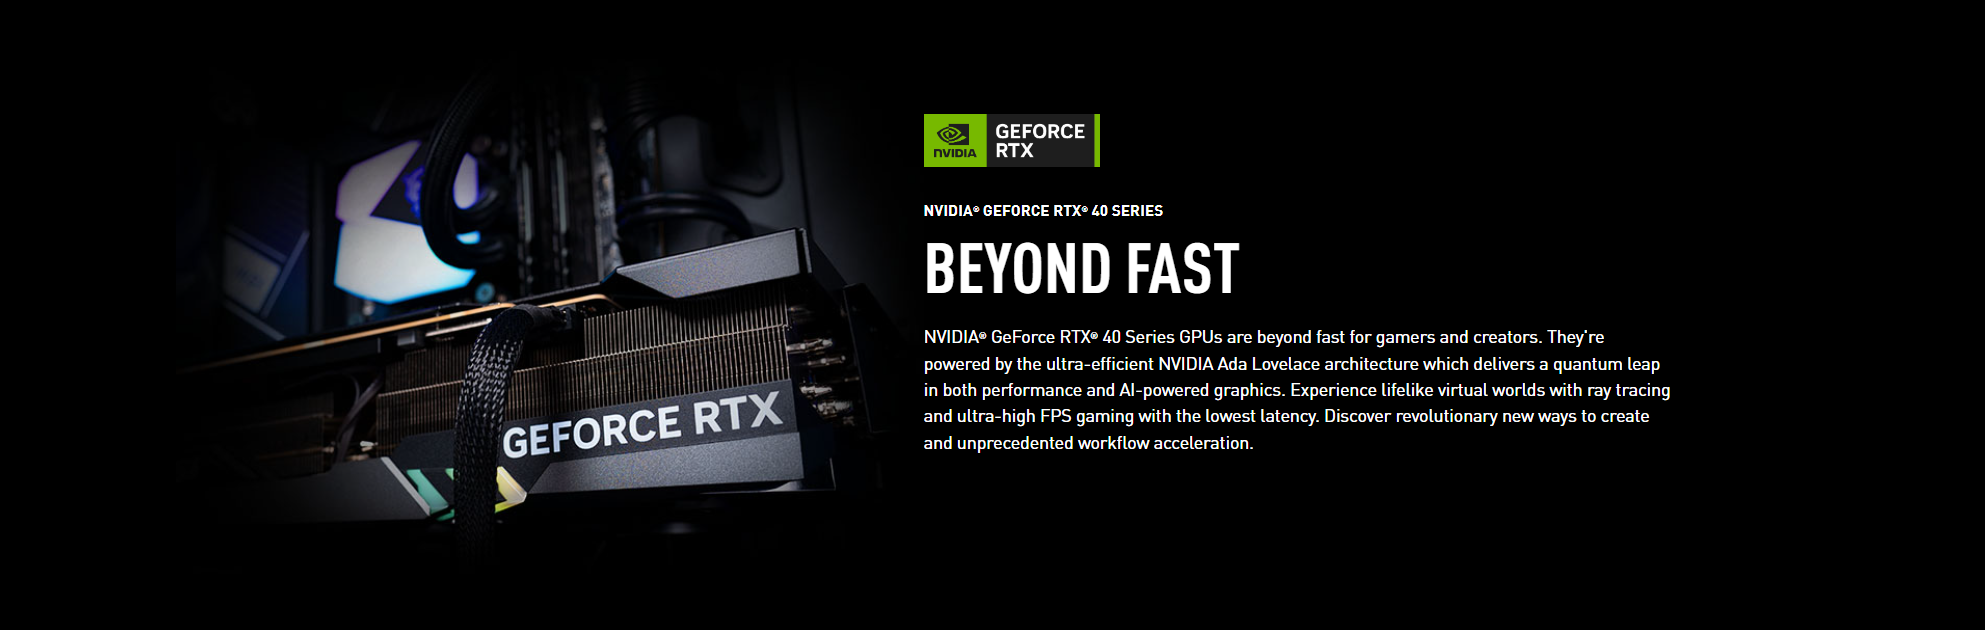 An image showcasing the NVIDIA® GeForce RTX® 40 Series GPUs, powered by the NVIDIA Ada Lovelace architecture. These GPUs offer exceptional speed for gamers and creators, with advanced features like ray tracing for realistic virtual worlds and high FPS gaming with minimal delay. They also provide groundbreaking performance and accelerated workflows for creators.